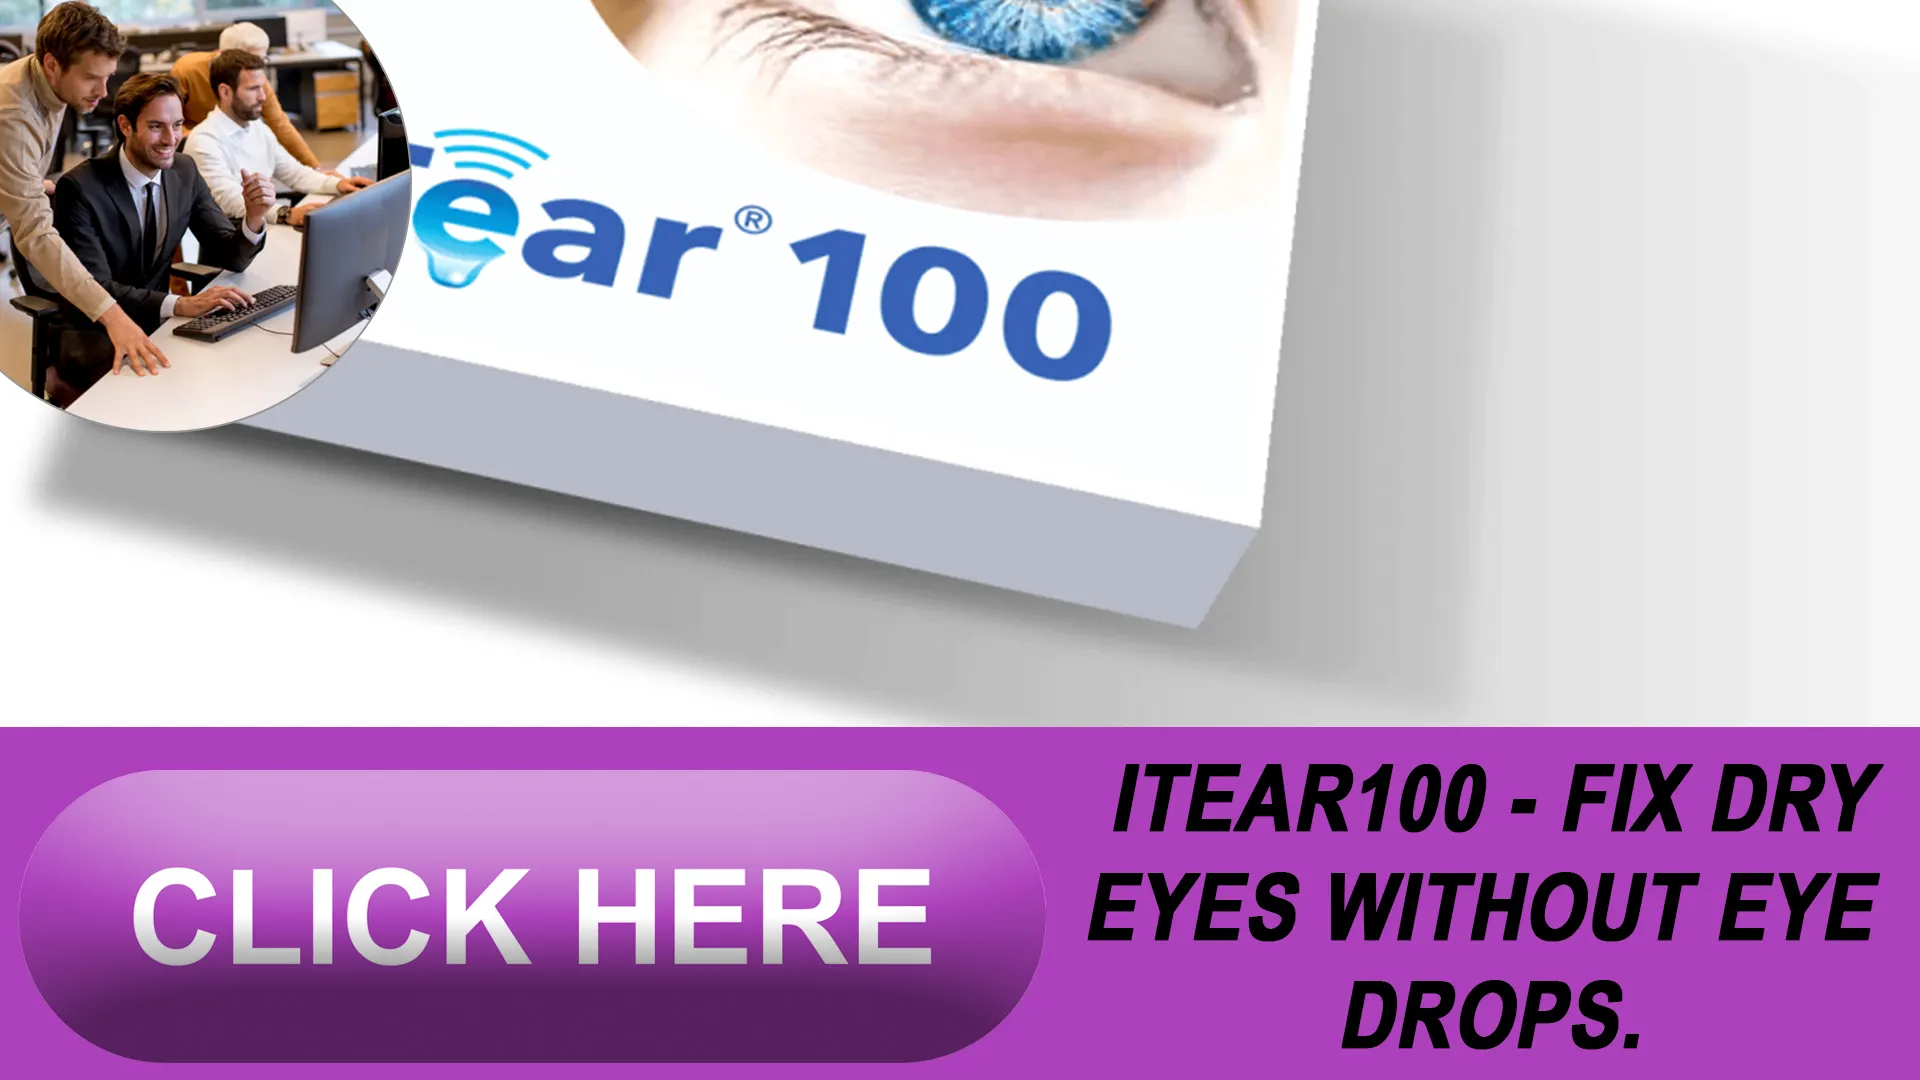 Understanding the iTEAR100 Device and How It Works